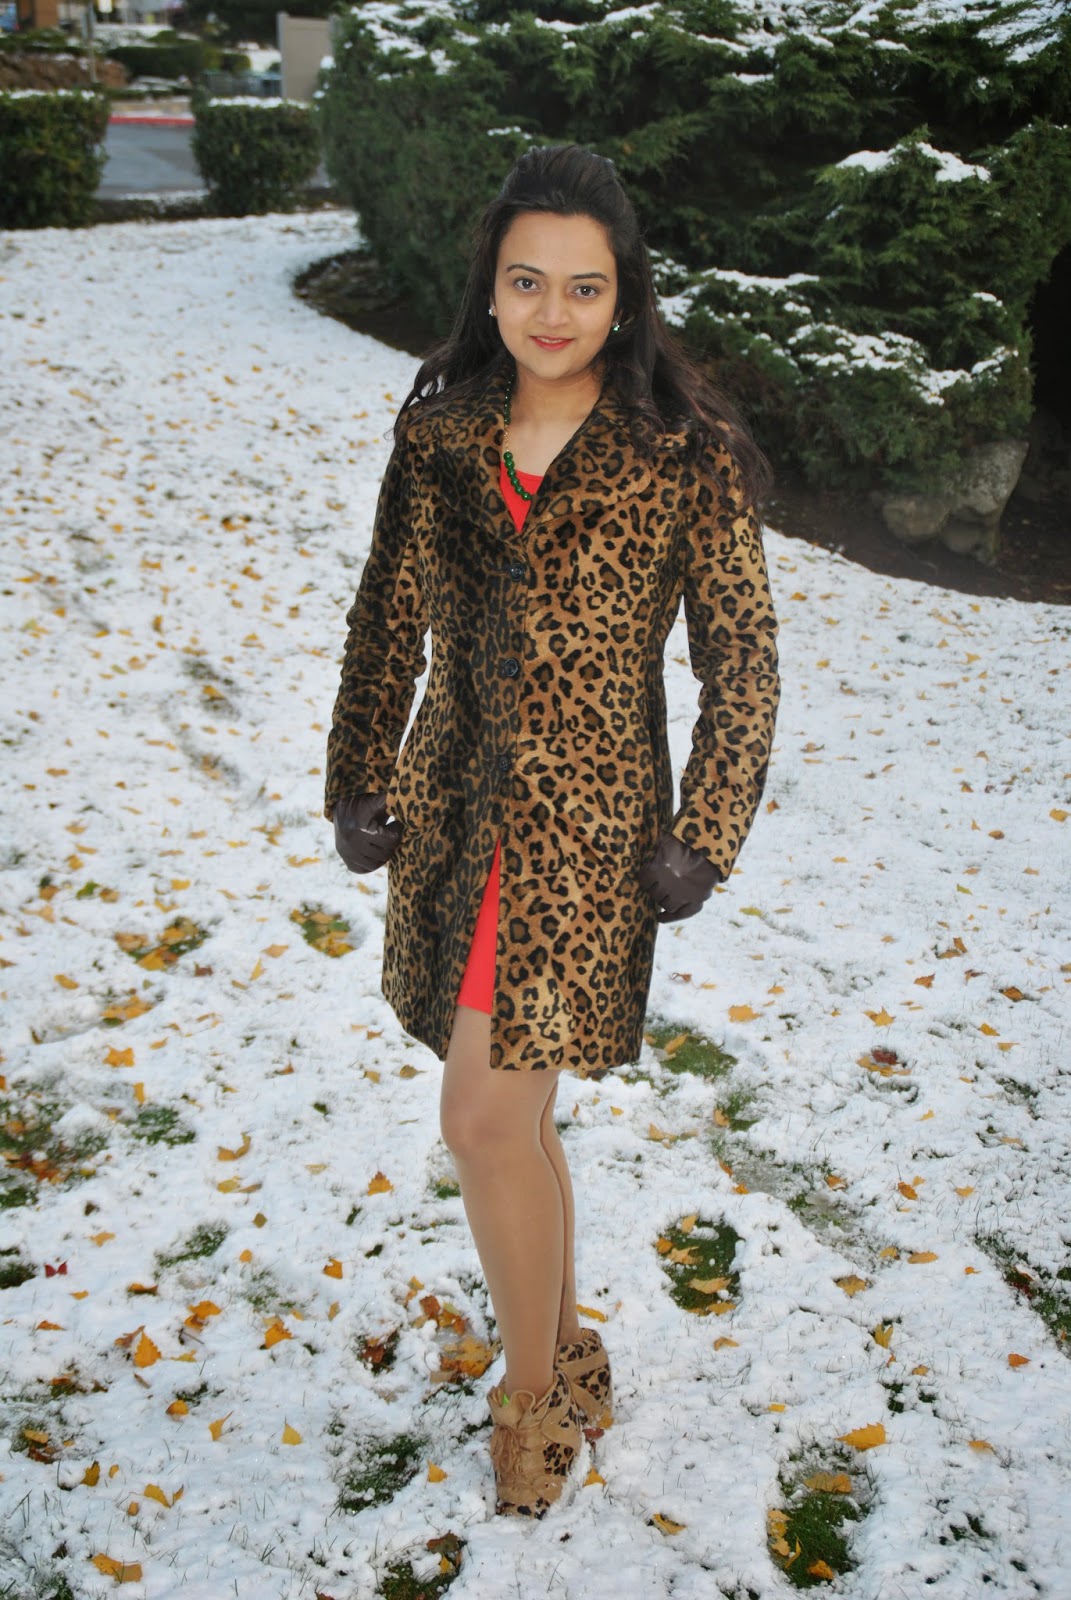 Leopard printed coats, Designer leopard printed jacket, Fashionable leopard prints, Indian Lady with a leopard printed jacket, Seattle winter fashion, beautiful girl in snow 